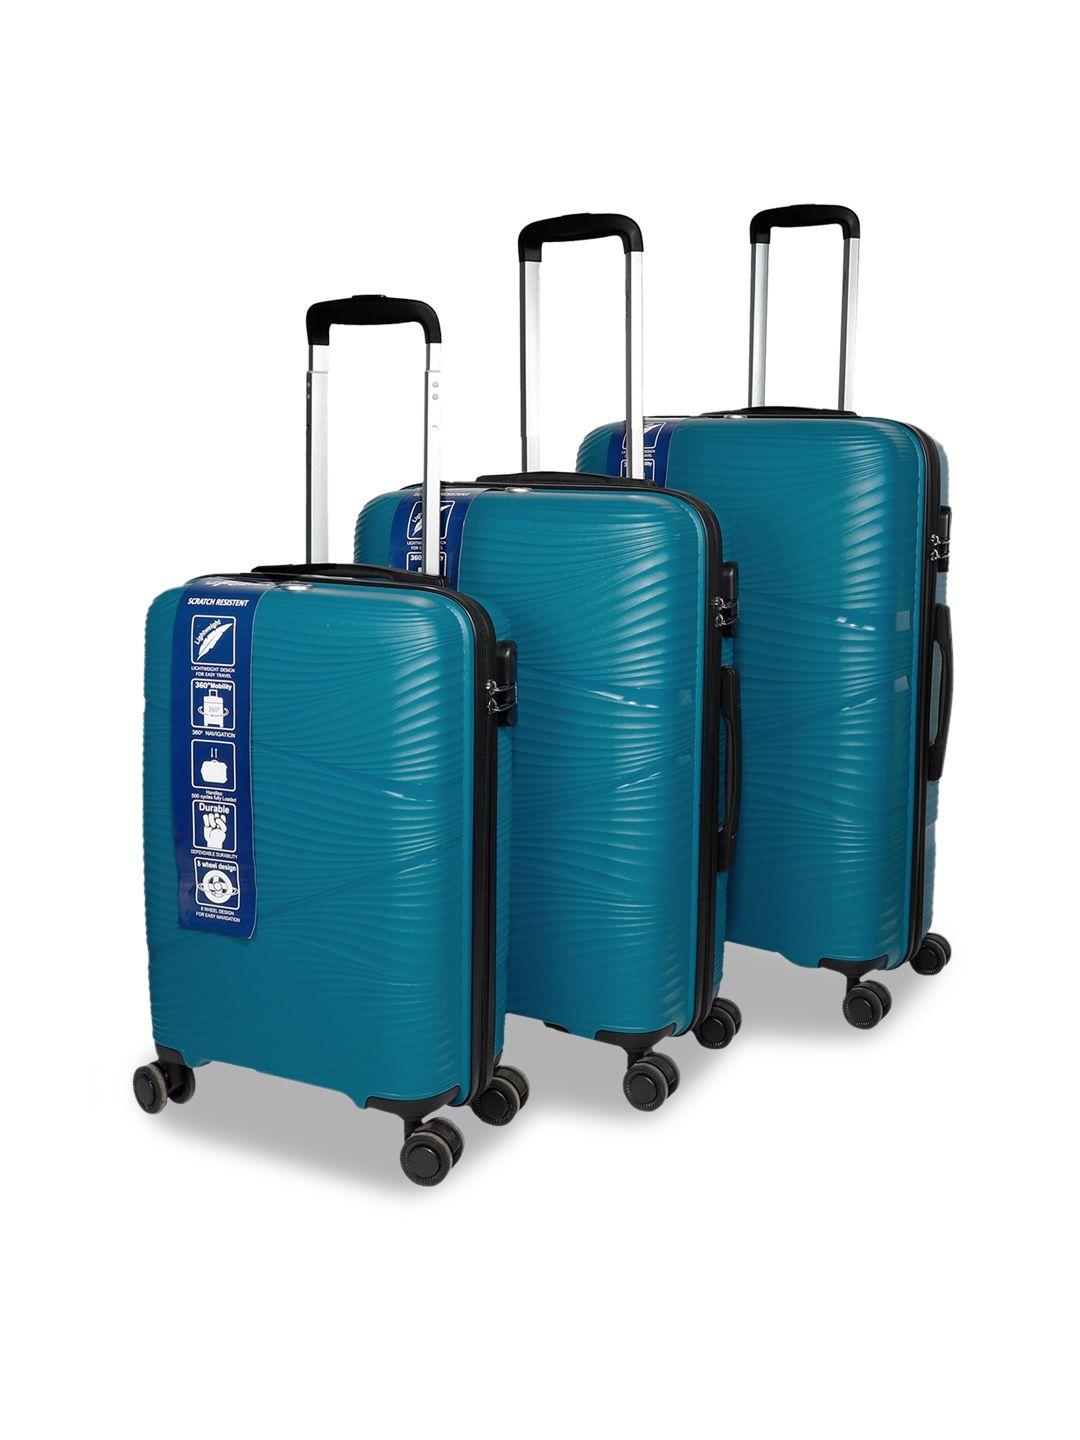 f gear set of 3 textured hard-sided trolley bags